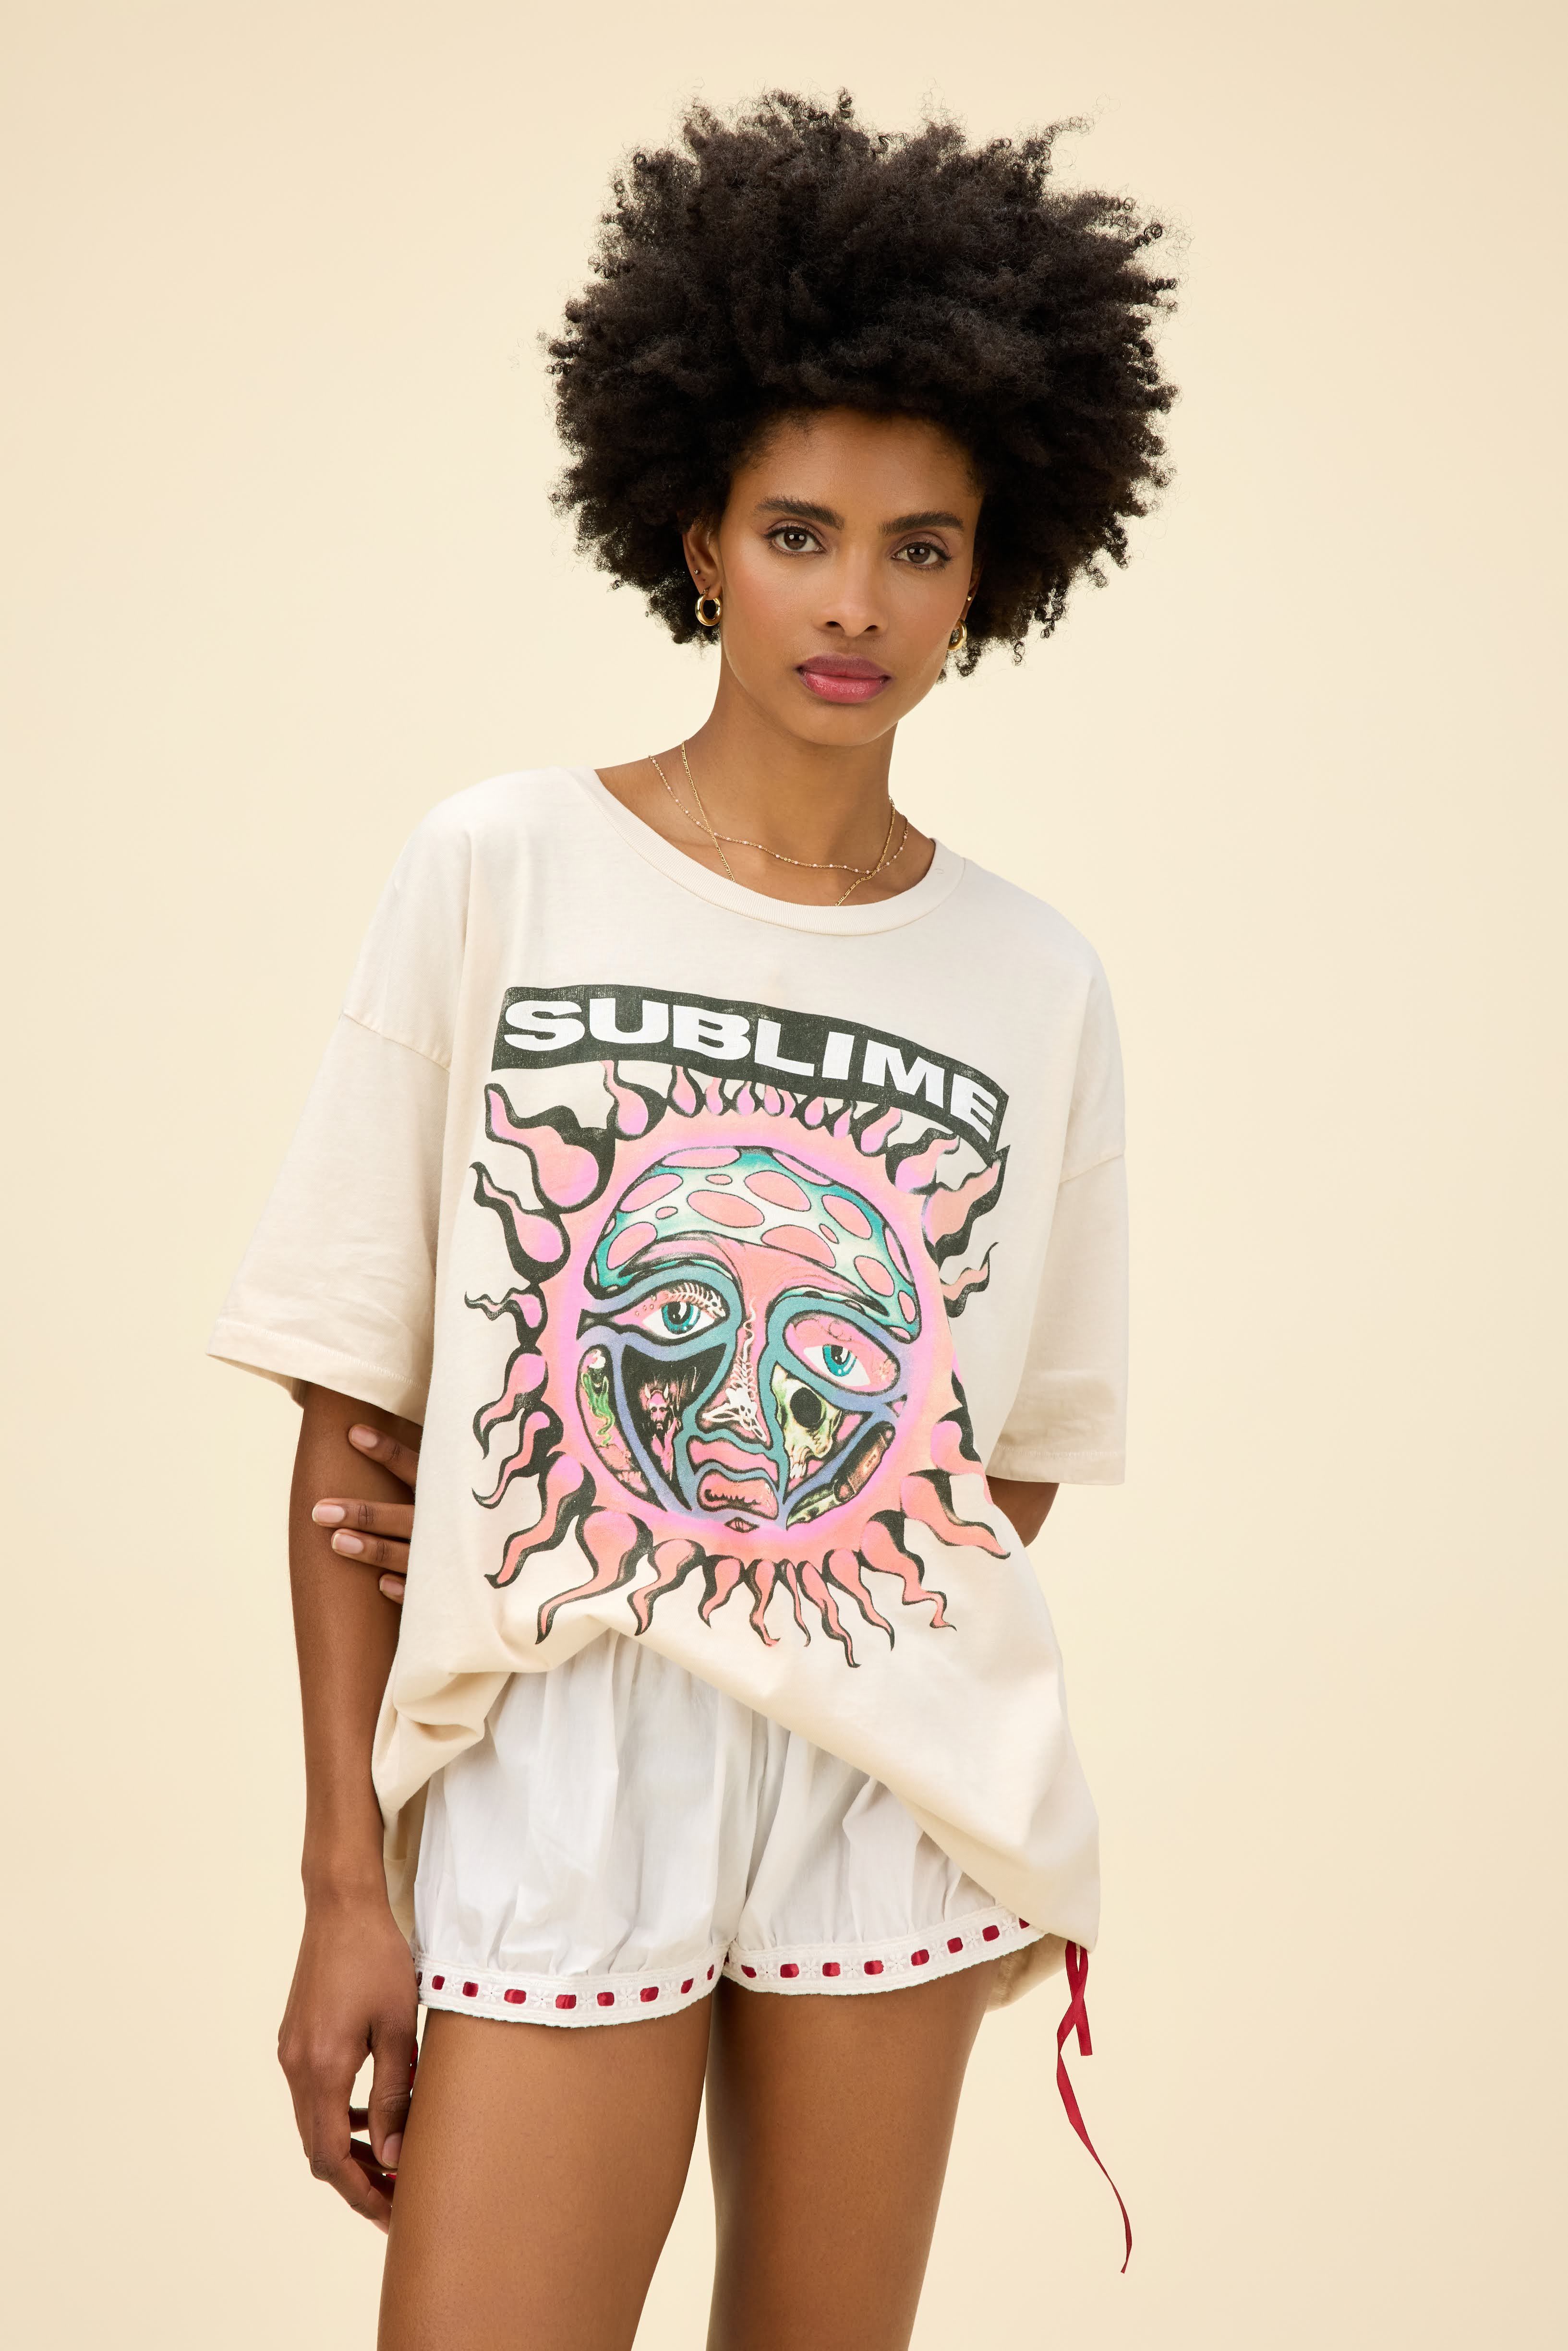 Sublime 40 Oz. To Freedom Merch Tee in Dirty White | Daydreamer